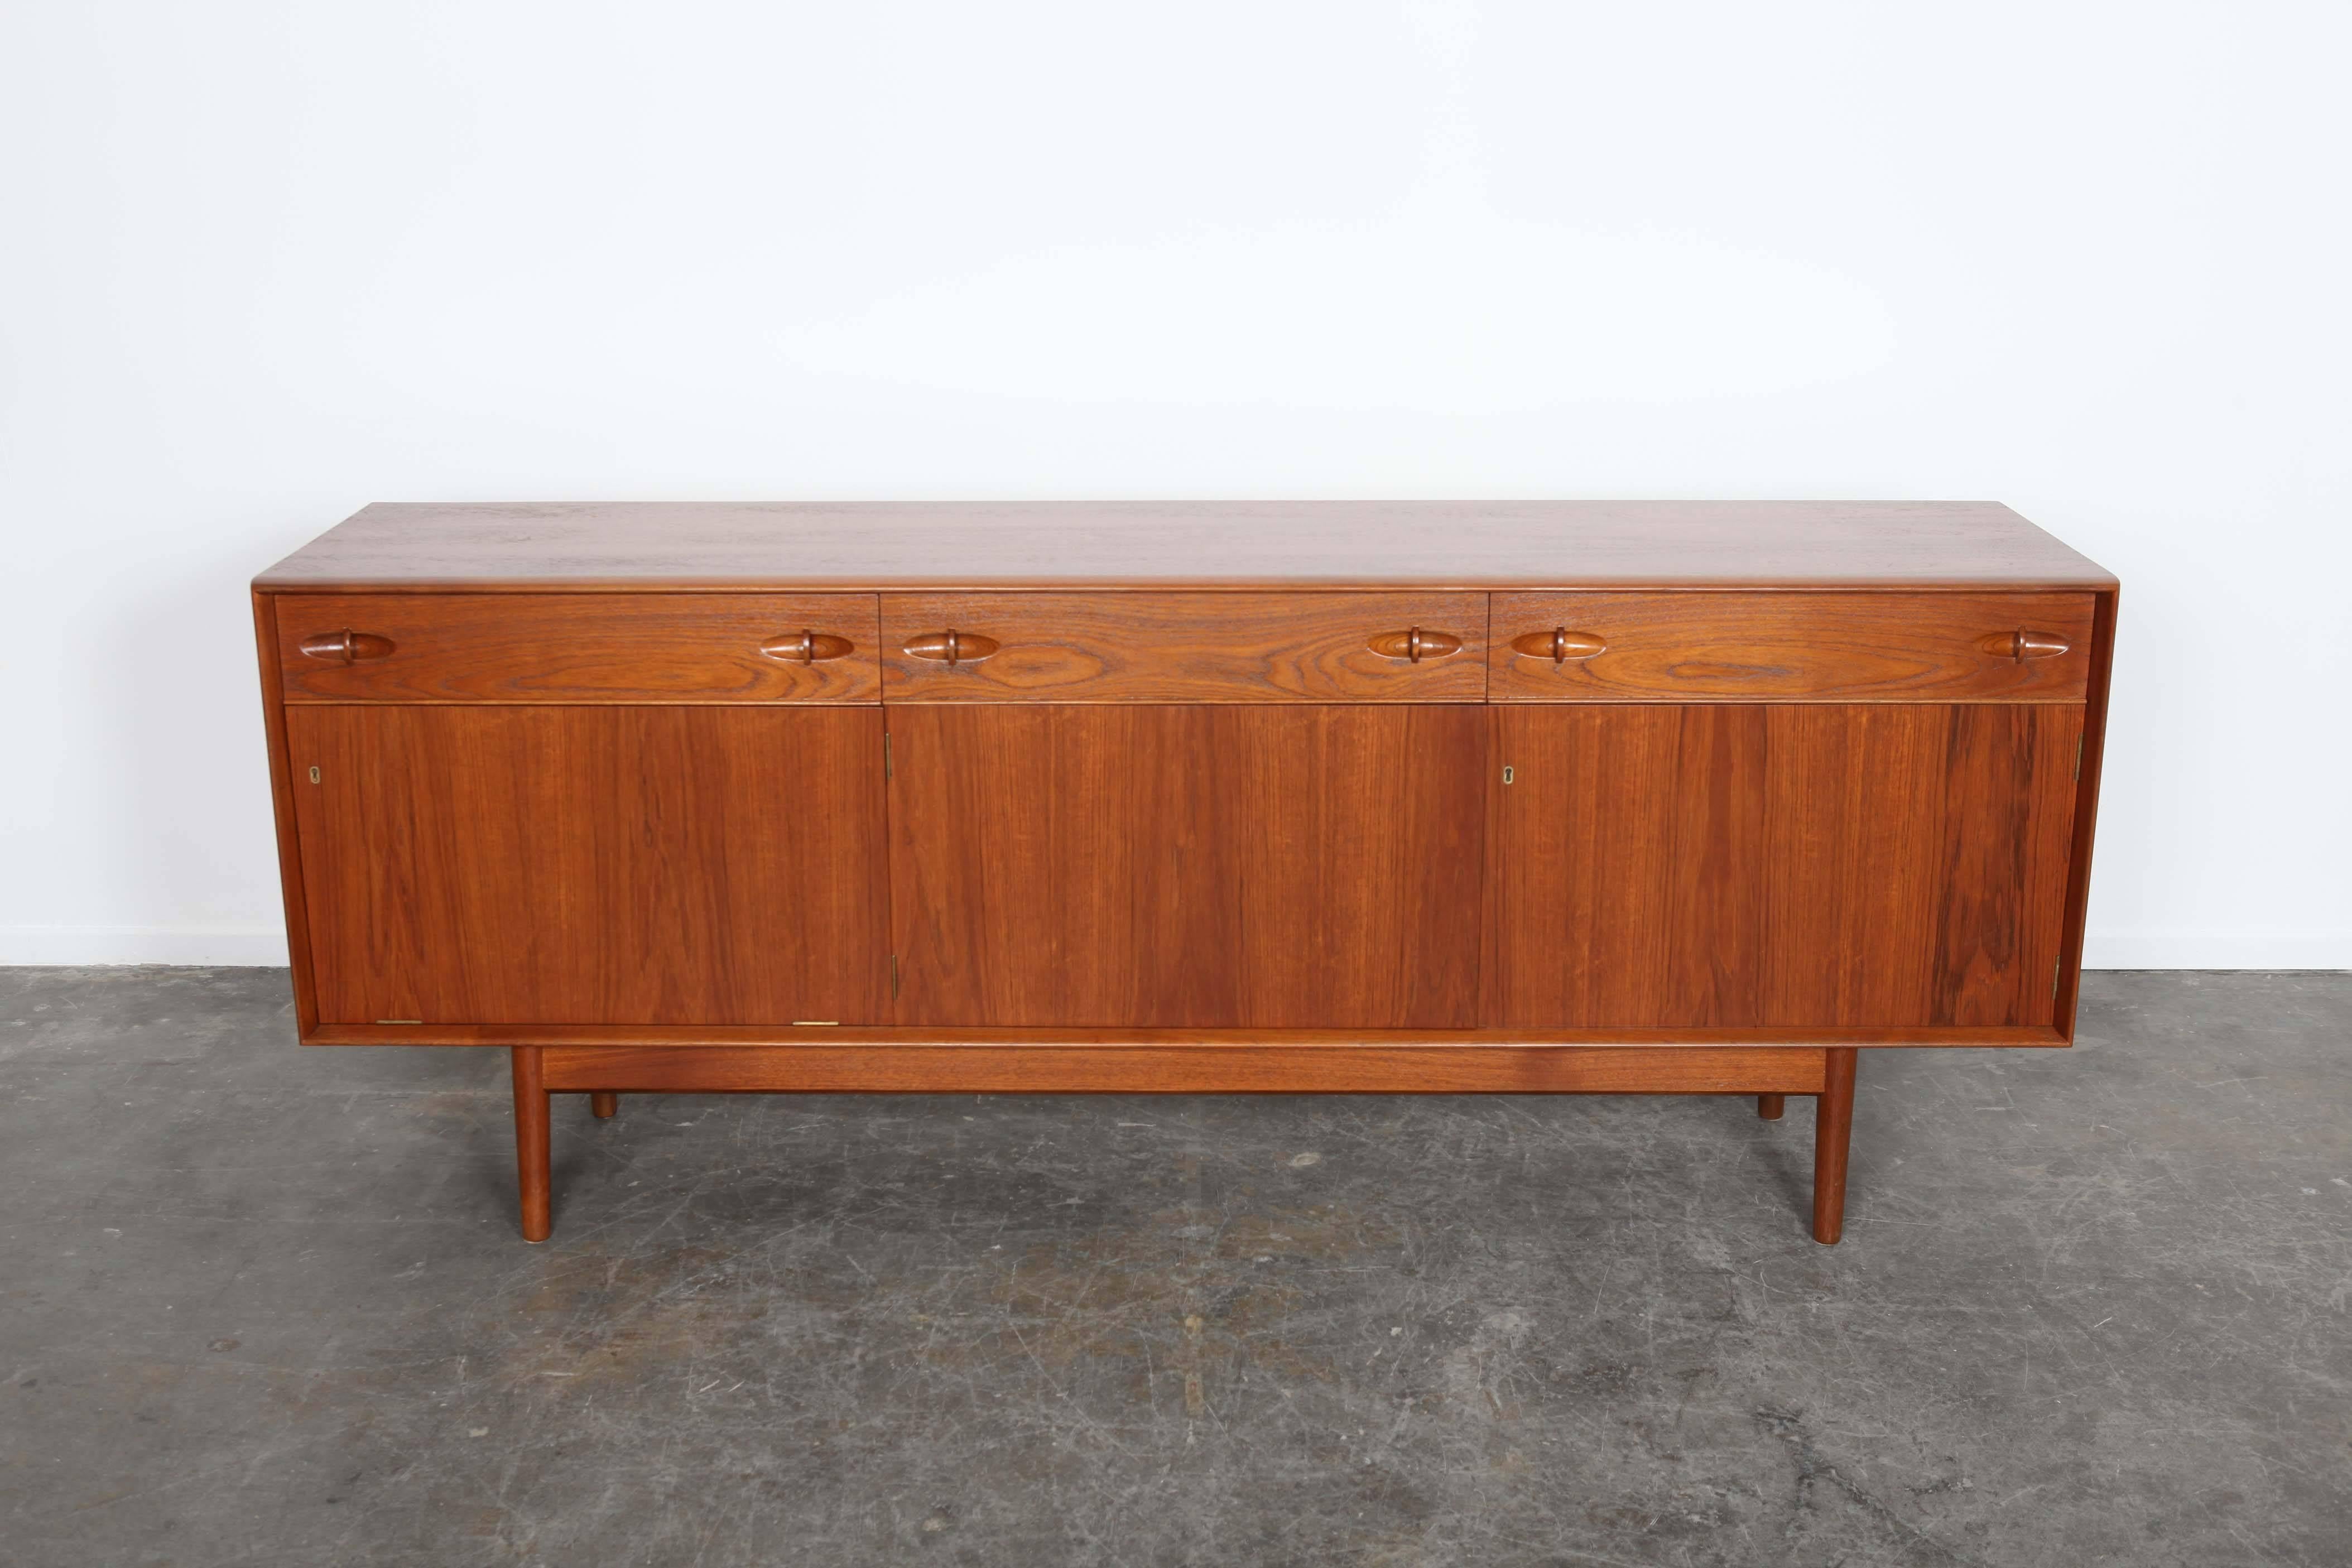 Four-drawer, teak sideboard made by the small, family-owned Dalescraft Furniture Co. of Yorkshire, England.